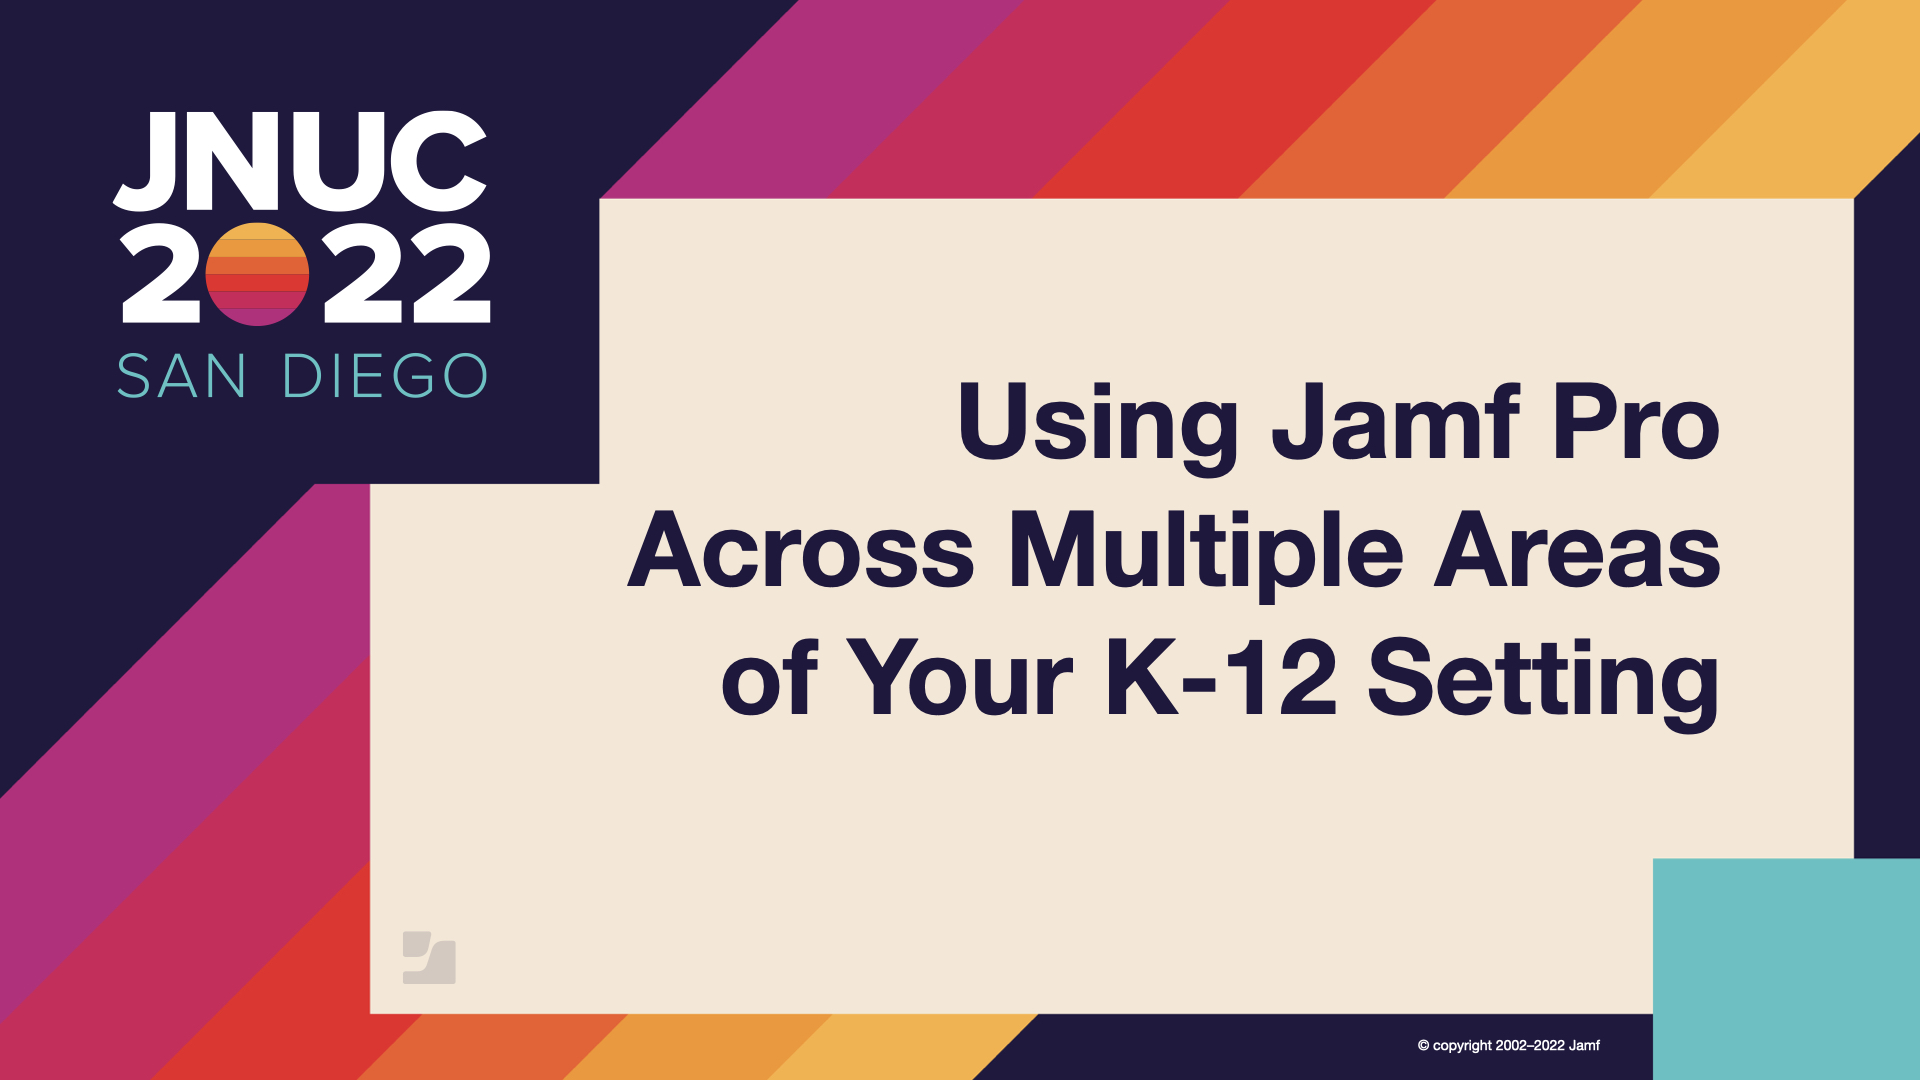 JNUC 2022 session: Using Jamf Pro Across Multiple Areas of Your K-12 Setting